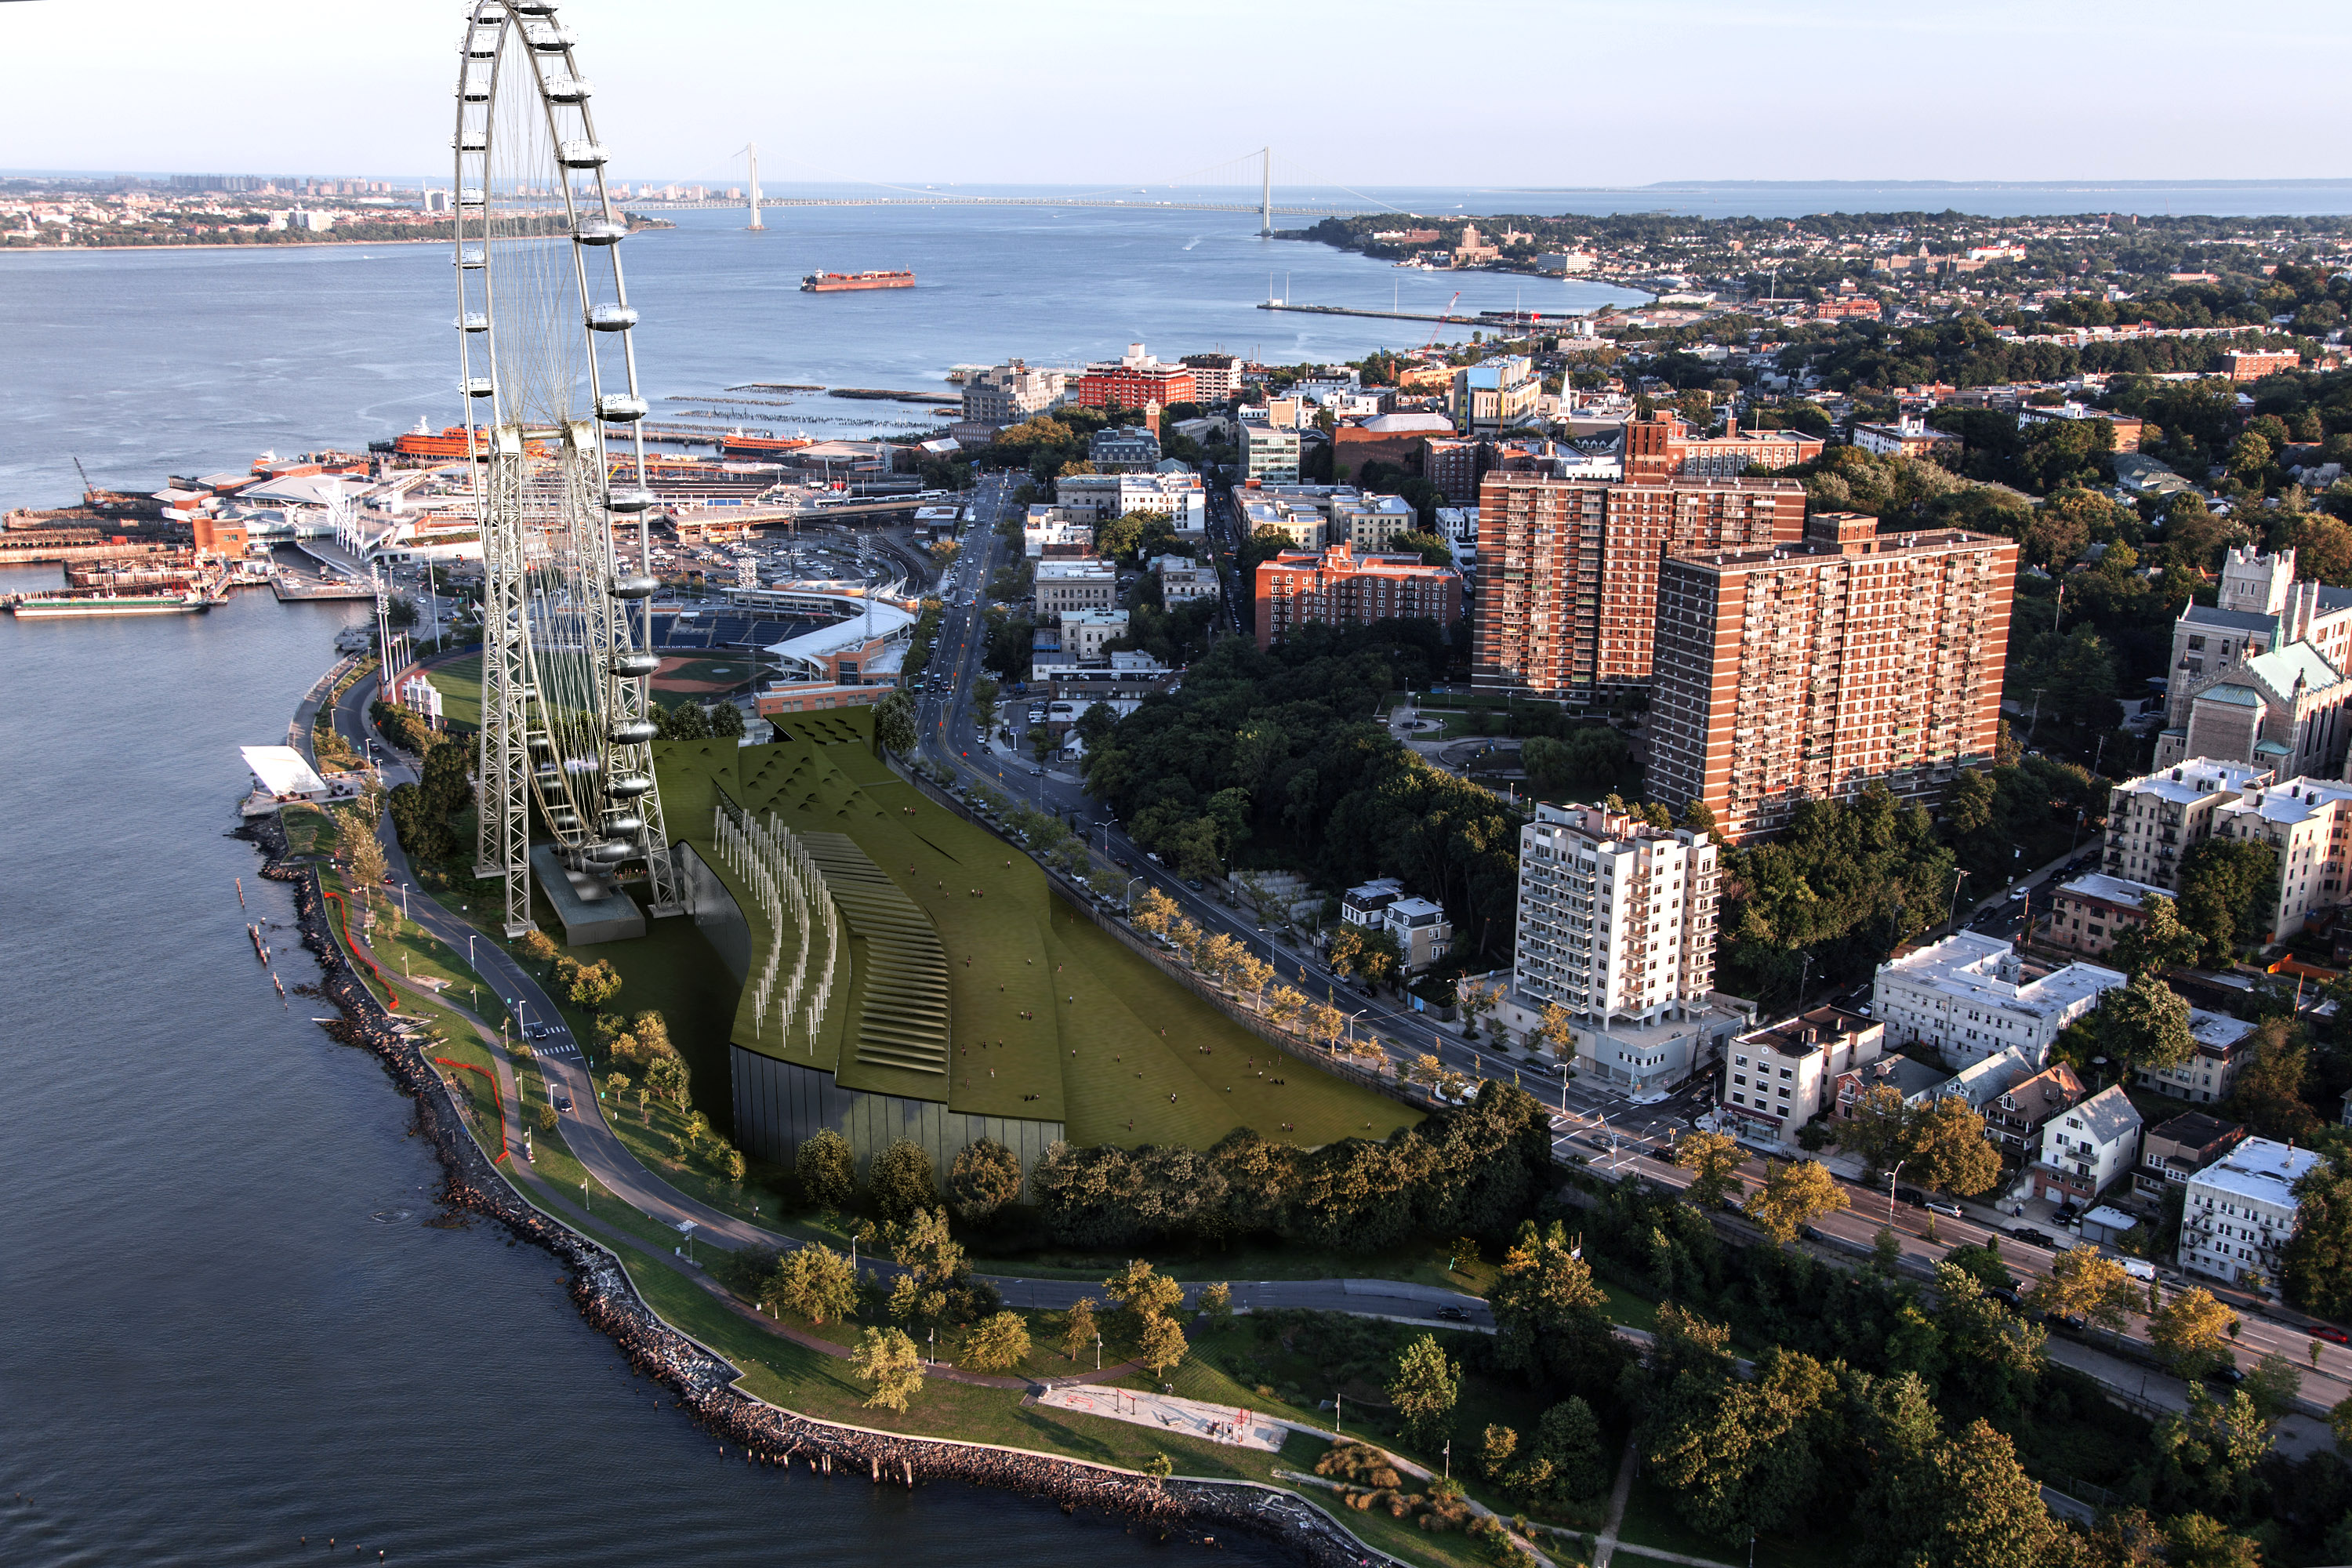 The World's Largest Ferris Wheel Was Almost in Staten Island